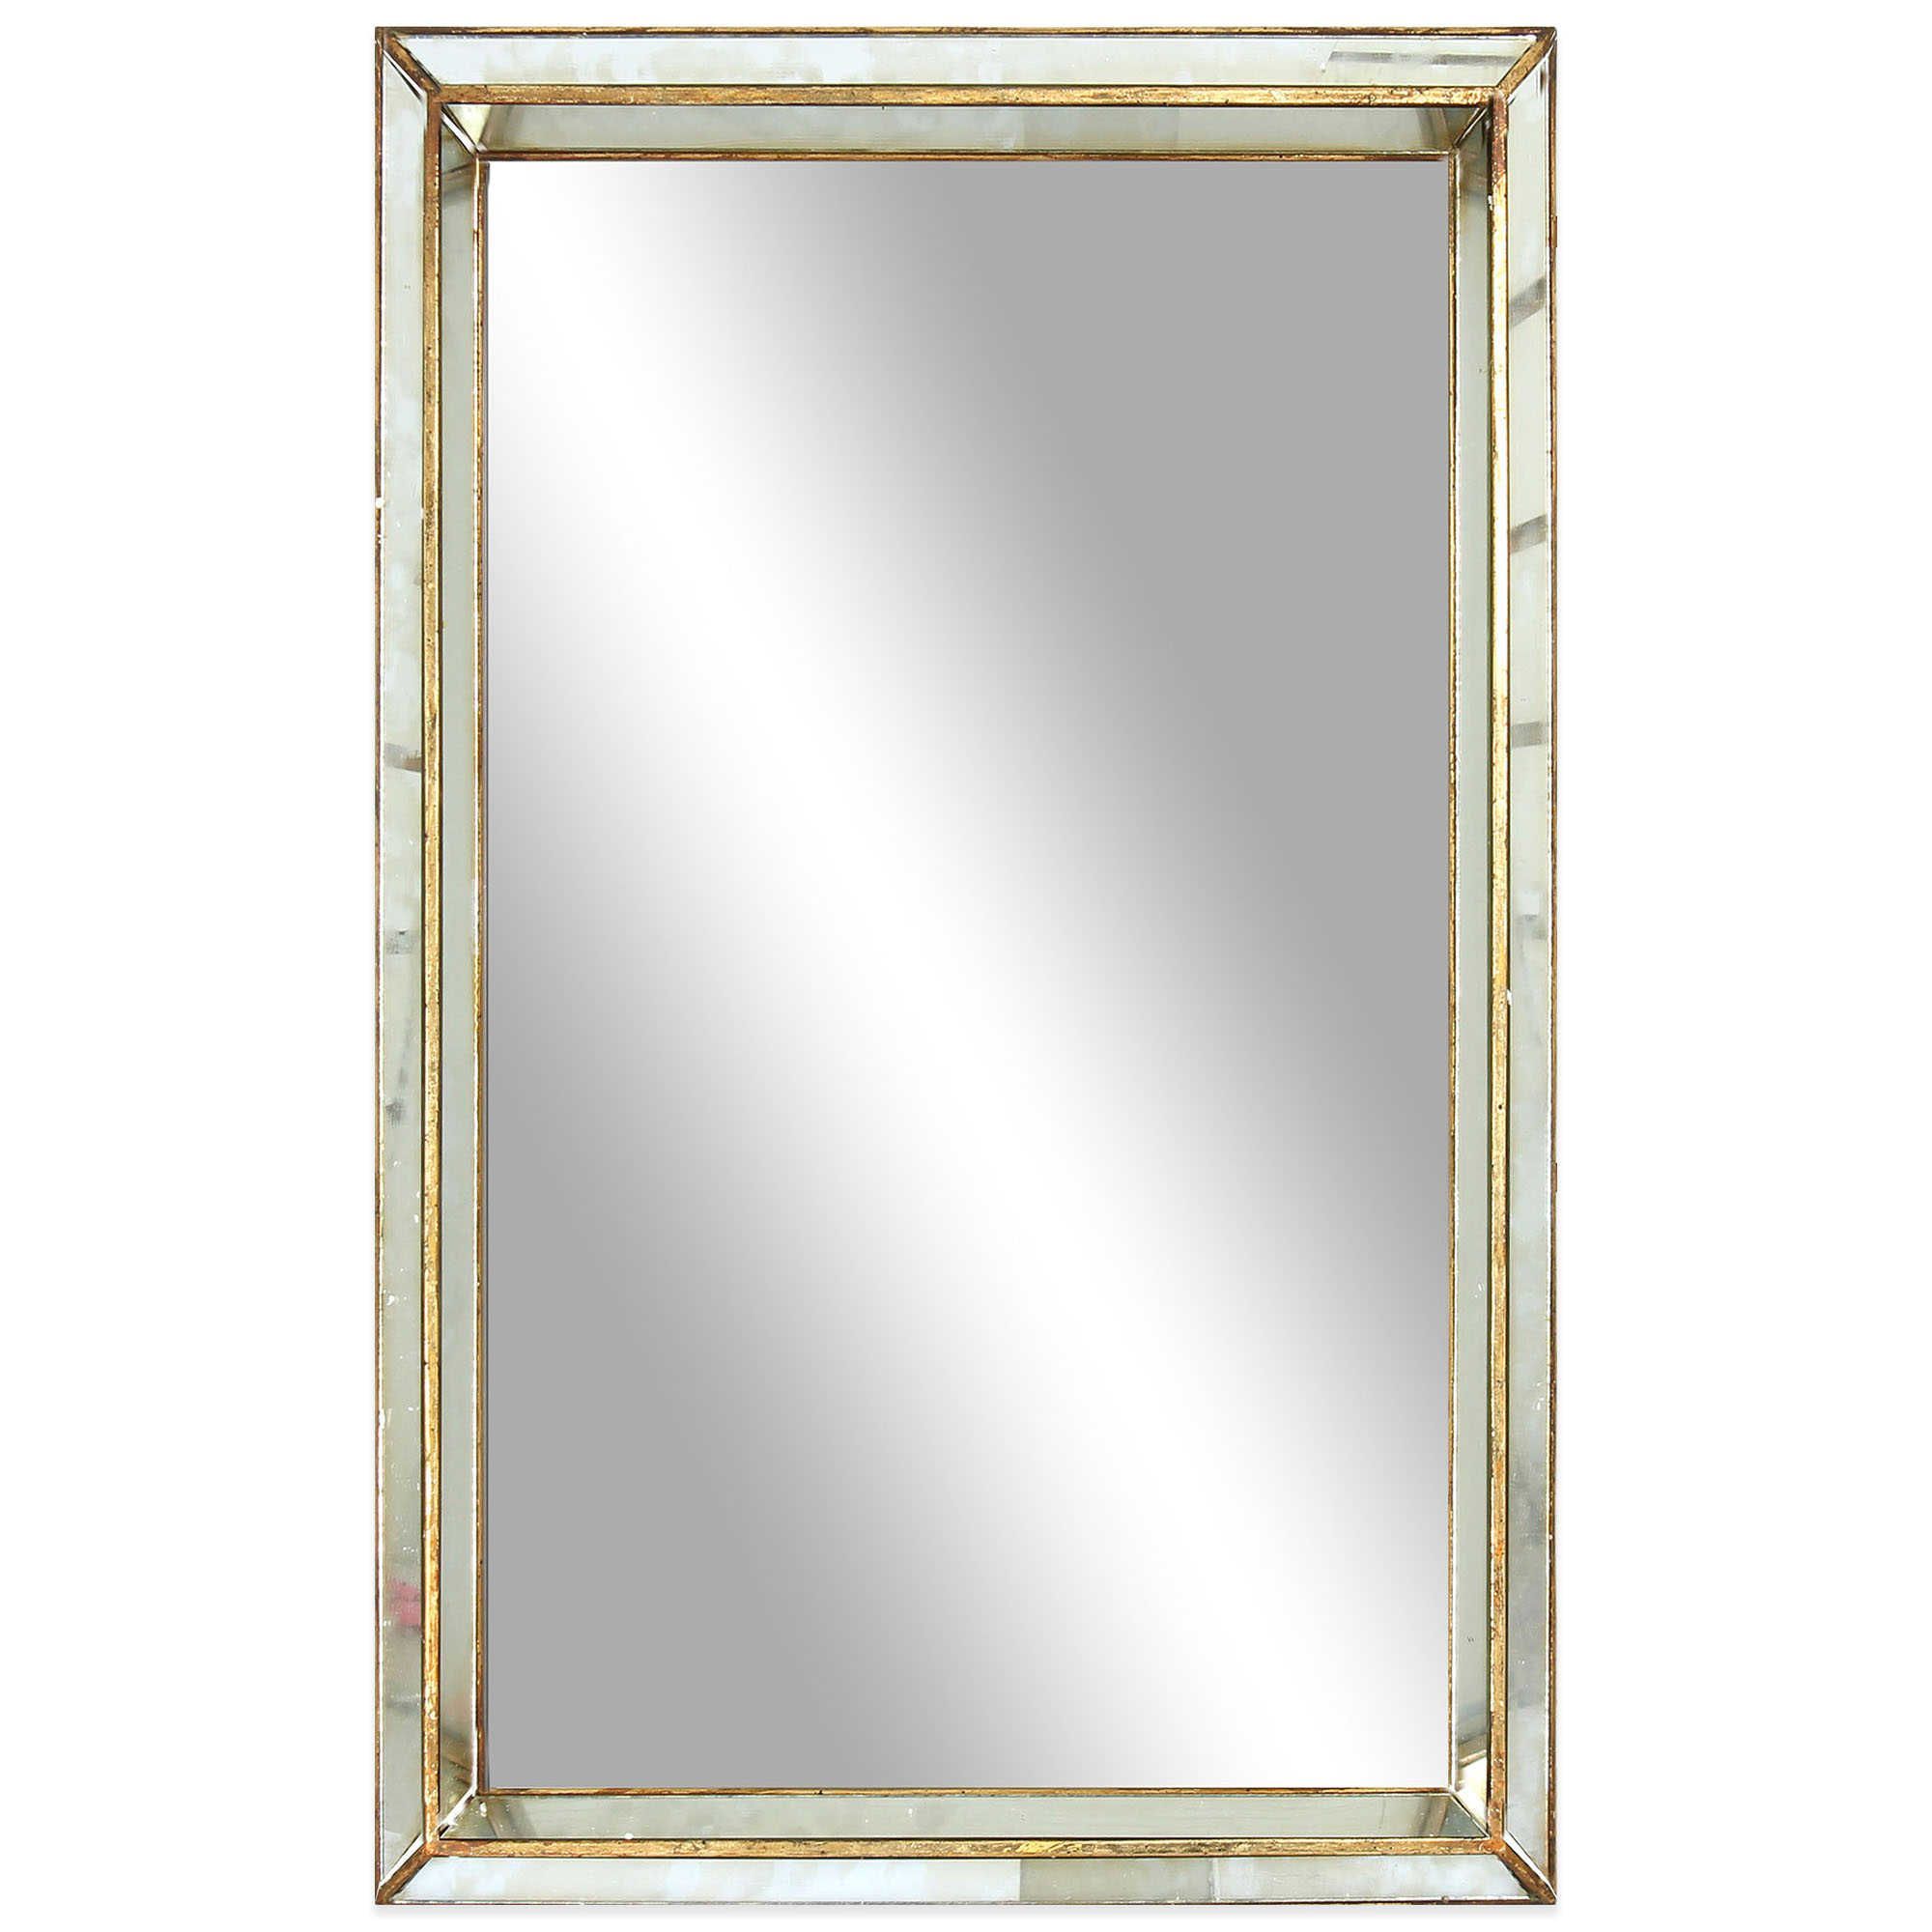 Invalid Url | Antique Gold Mirror, Large Mirror, Rectangular Mirror Inside Ultra Brushed Gold Rectangular Framed Wall Mirrors (View 7 of 15)